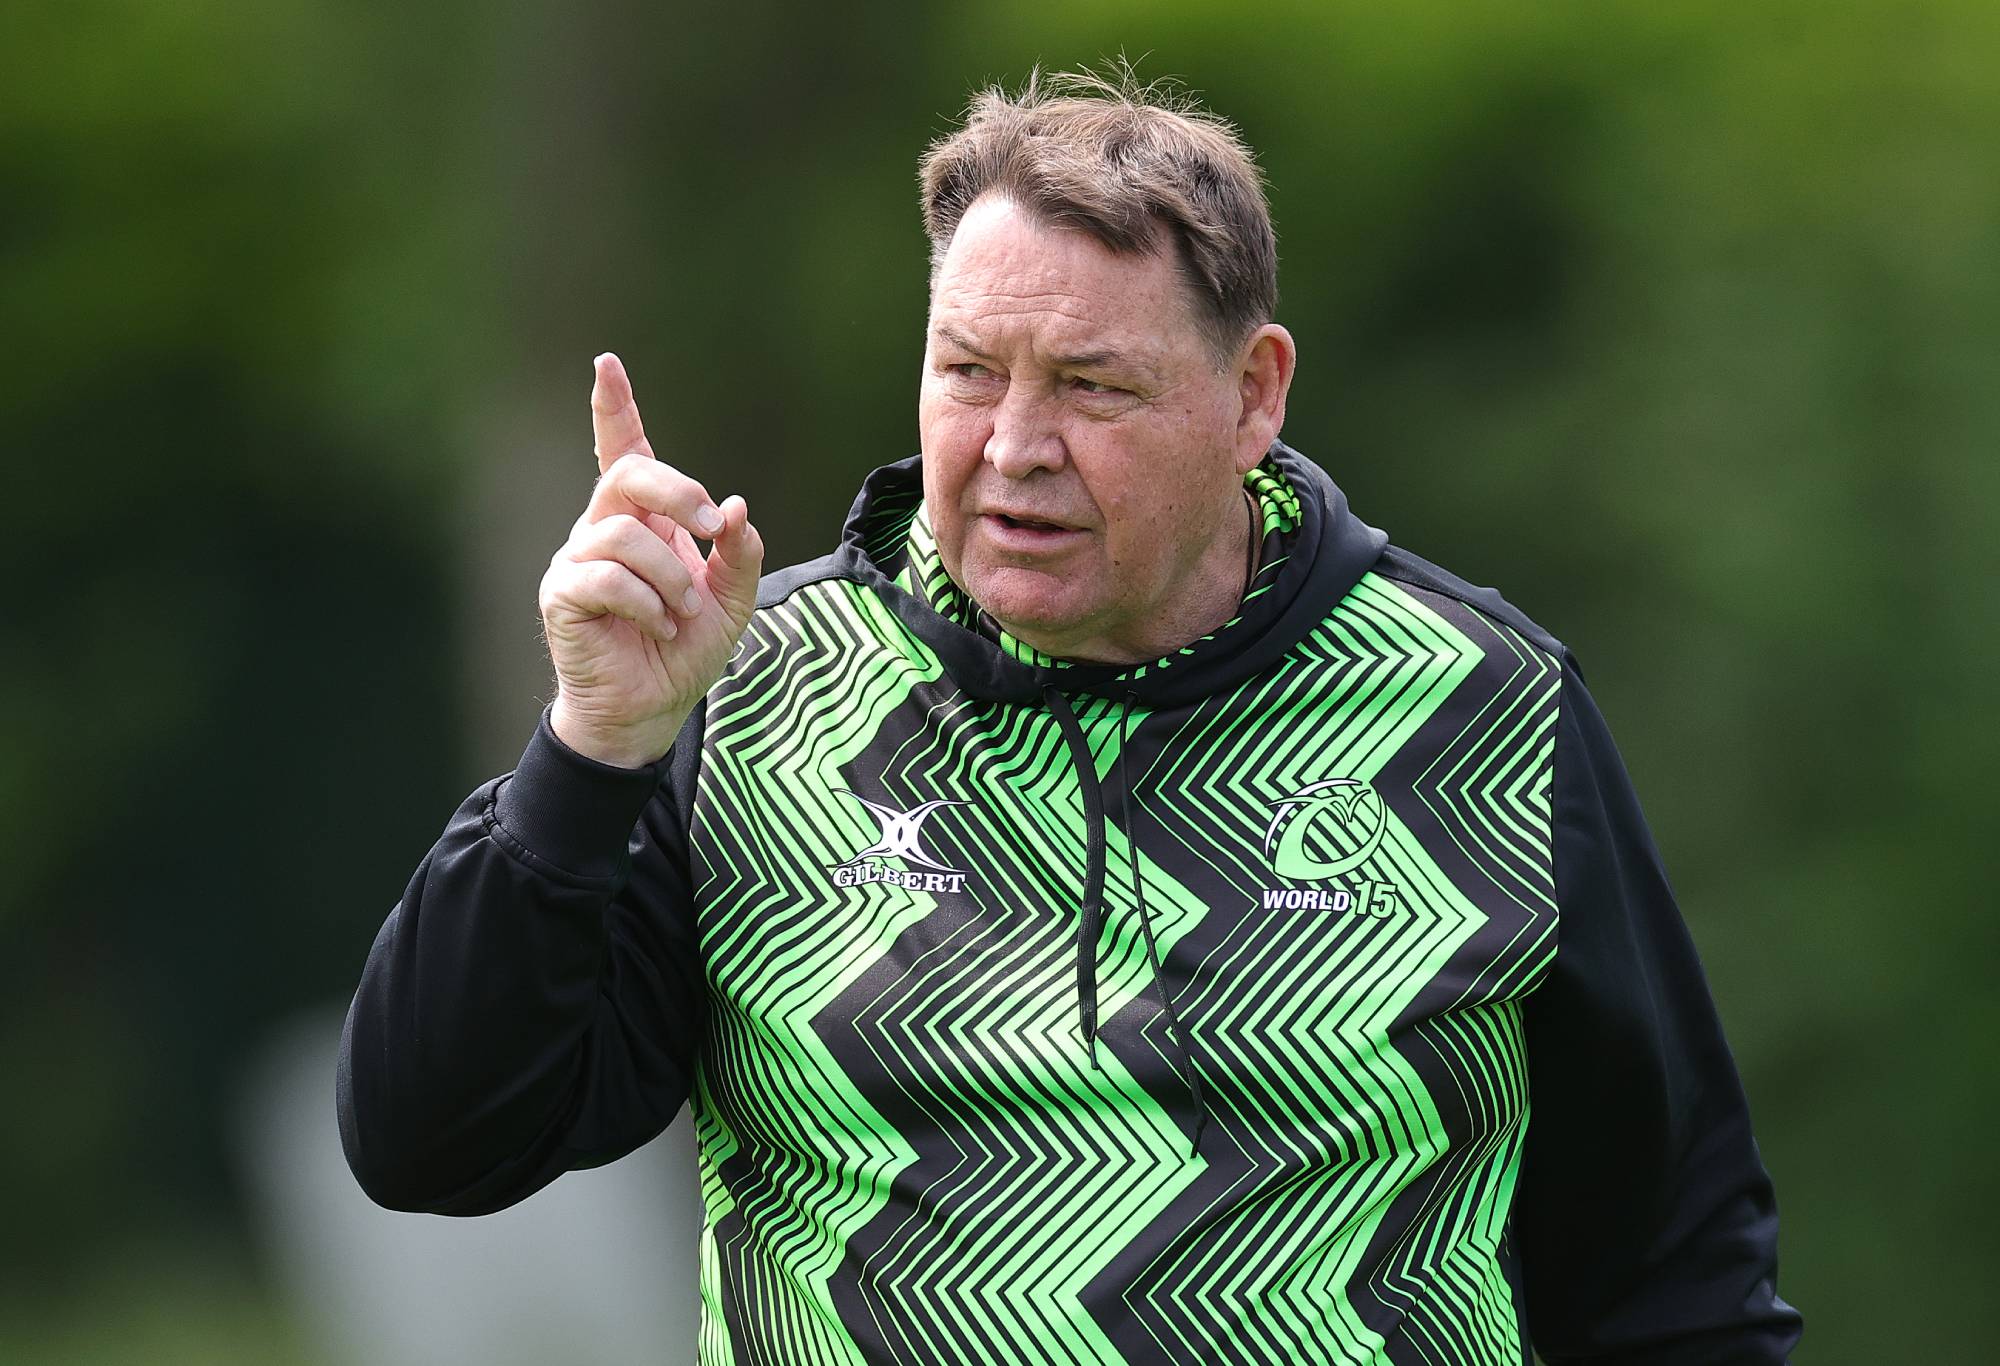 Steve Hansen, the World XV head coach looks on during the World XV training session at The Lensbury on May 23, 2023 in Teddington, England. The World XV will play against the Barbarians at Twickenham on Sunday May 28. (Photo by David Rogers/Getty Images for Barbarians)